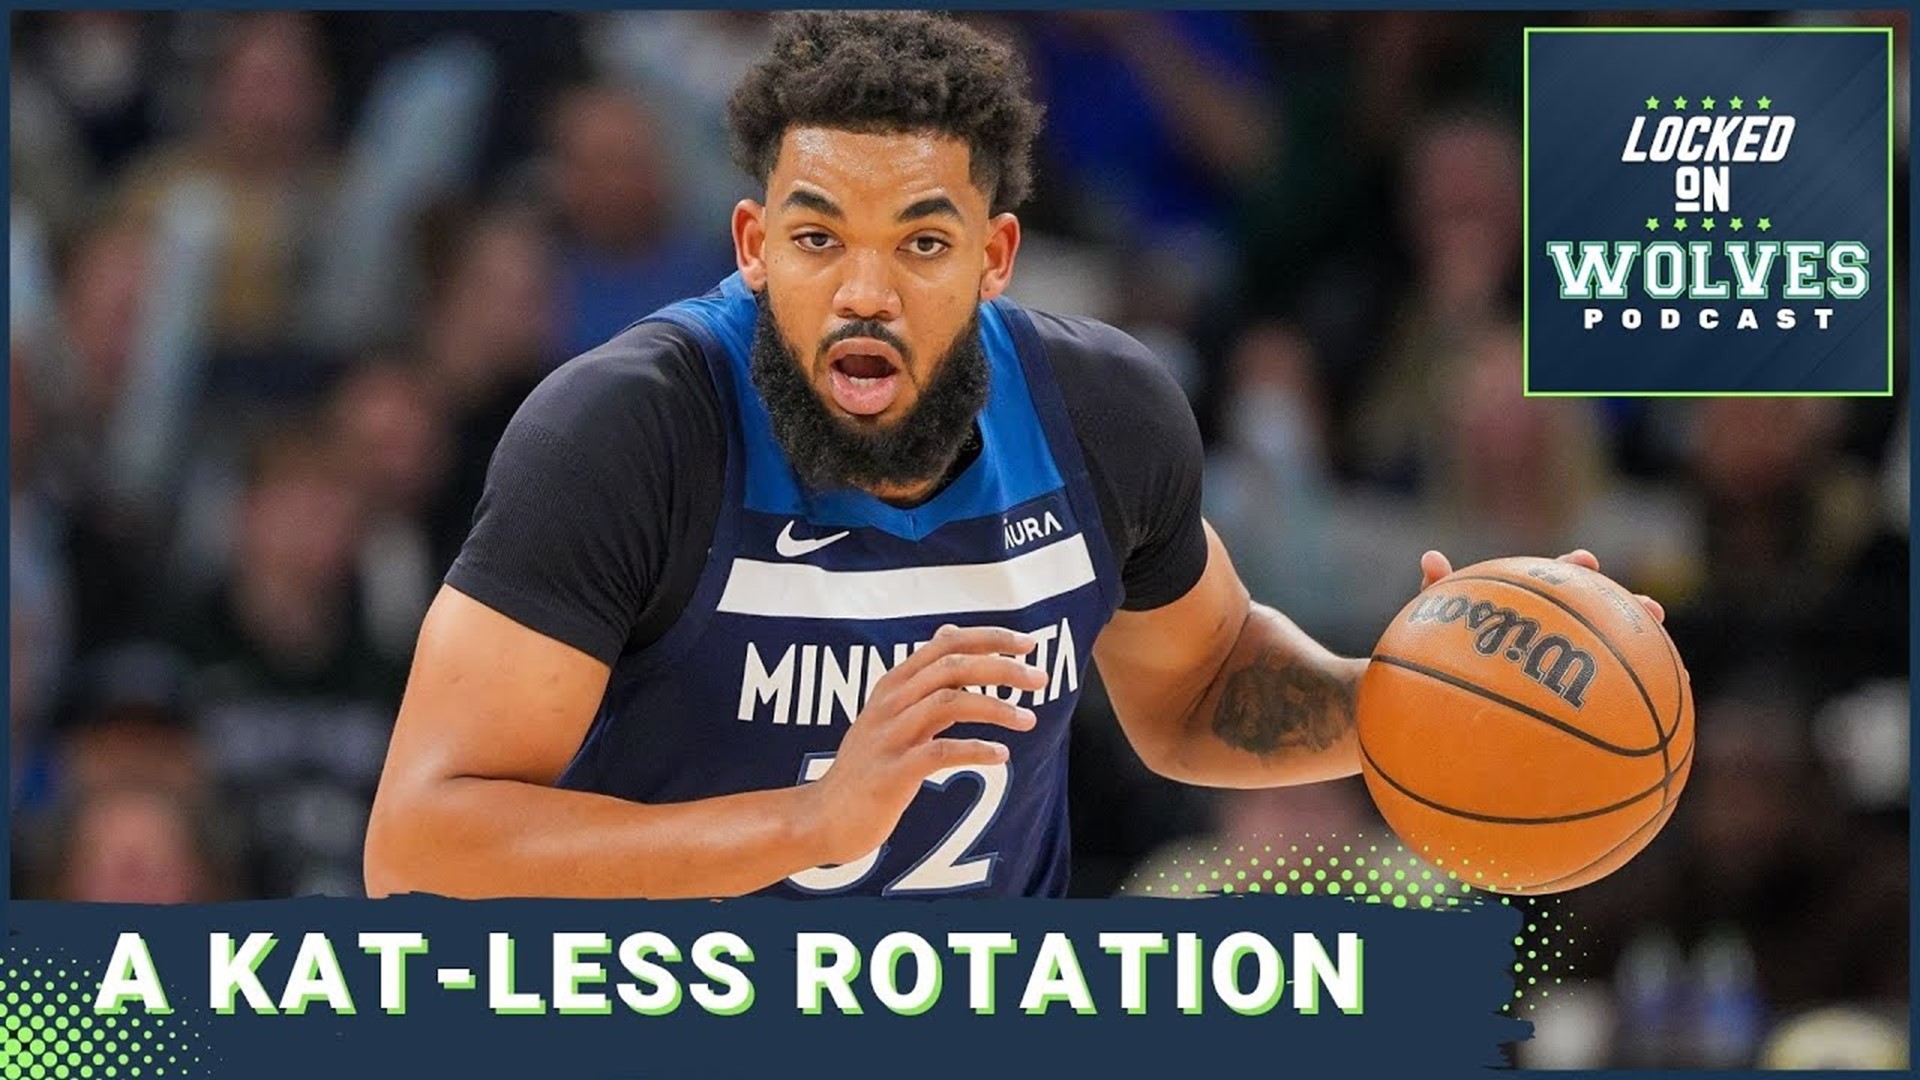 The Minnesota Timberwolves possible rotation without Karl-Anthony Towns + Monte Morris lineup data